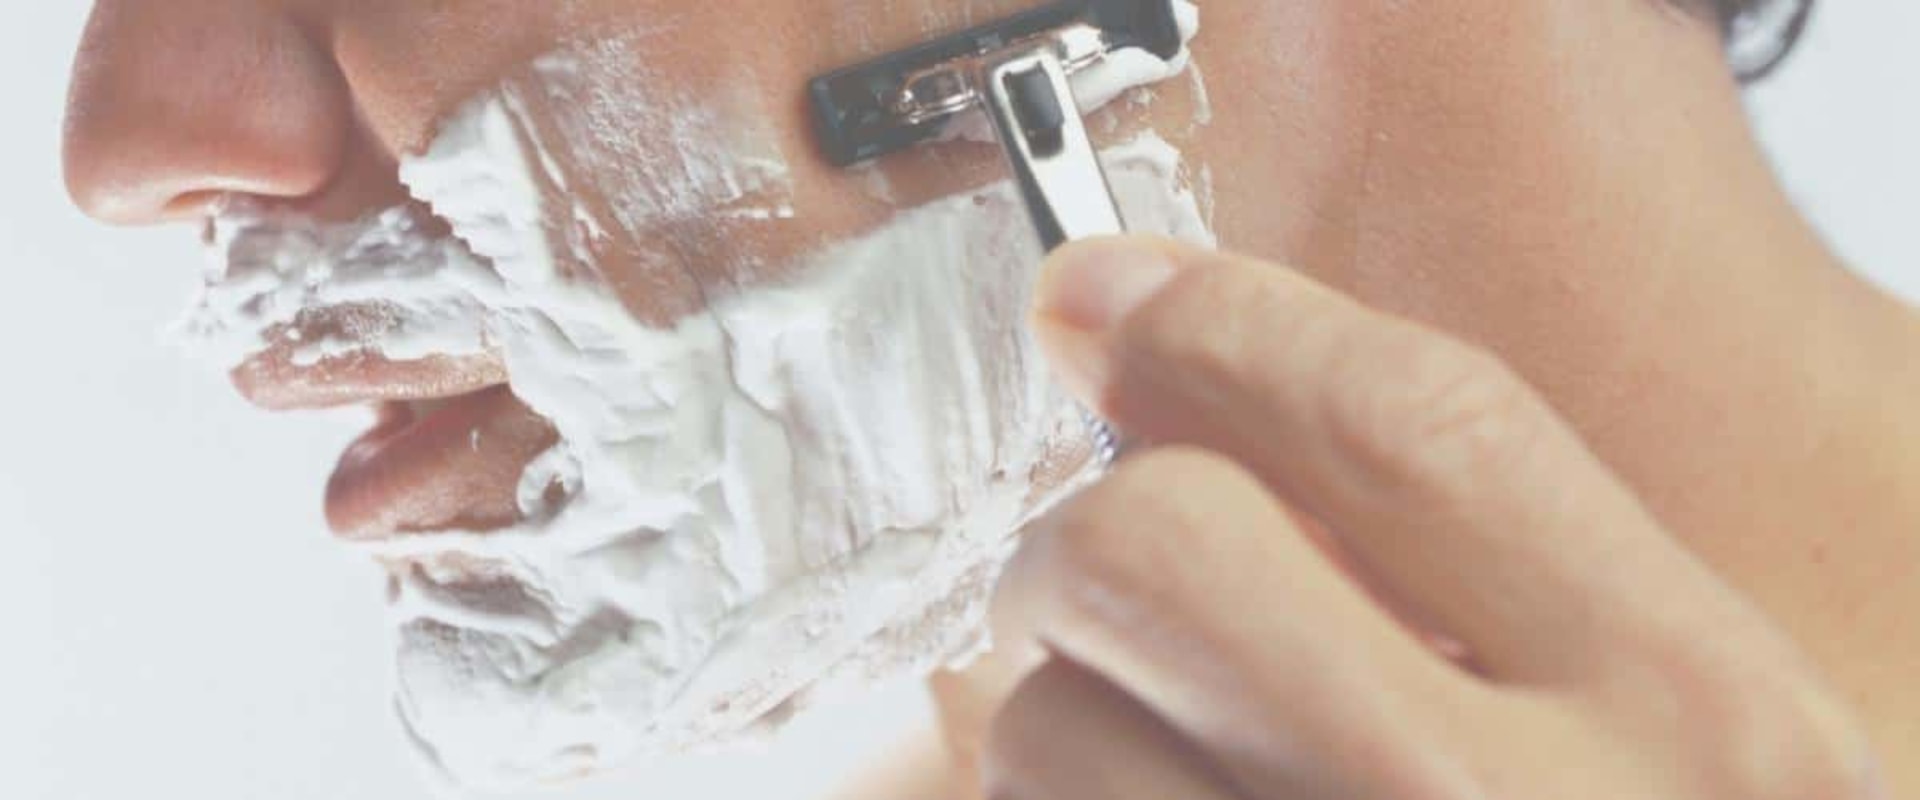 The Ultimate Guide to Hypoallergenic Men's Beauty Care